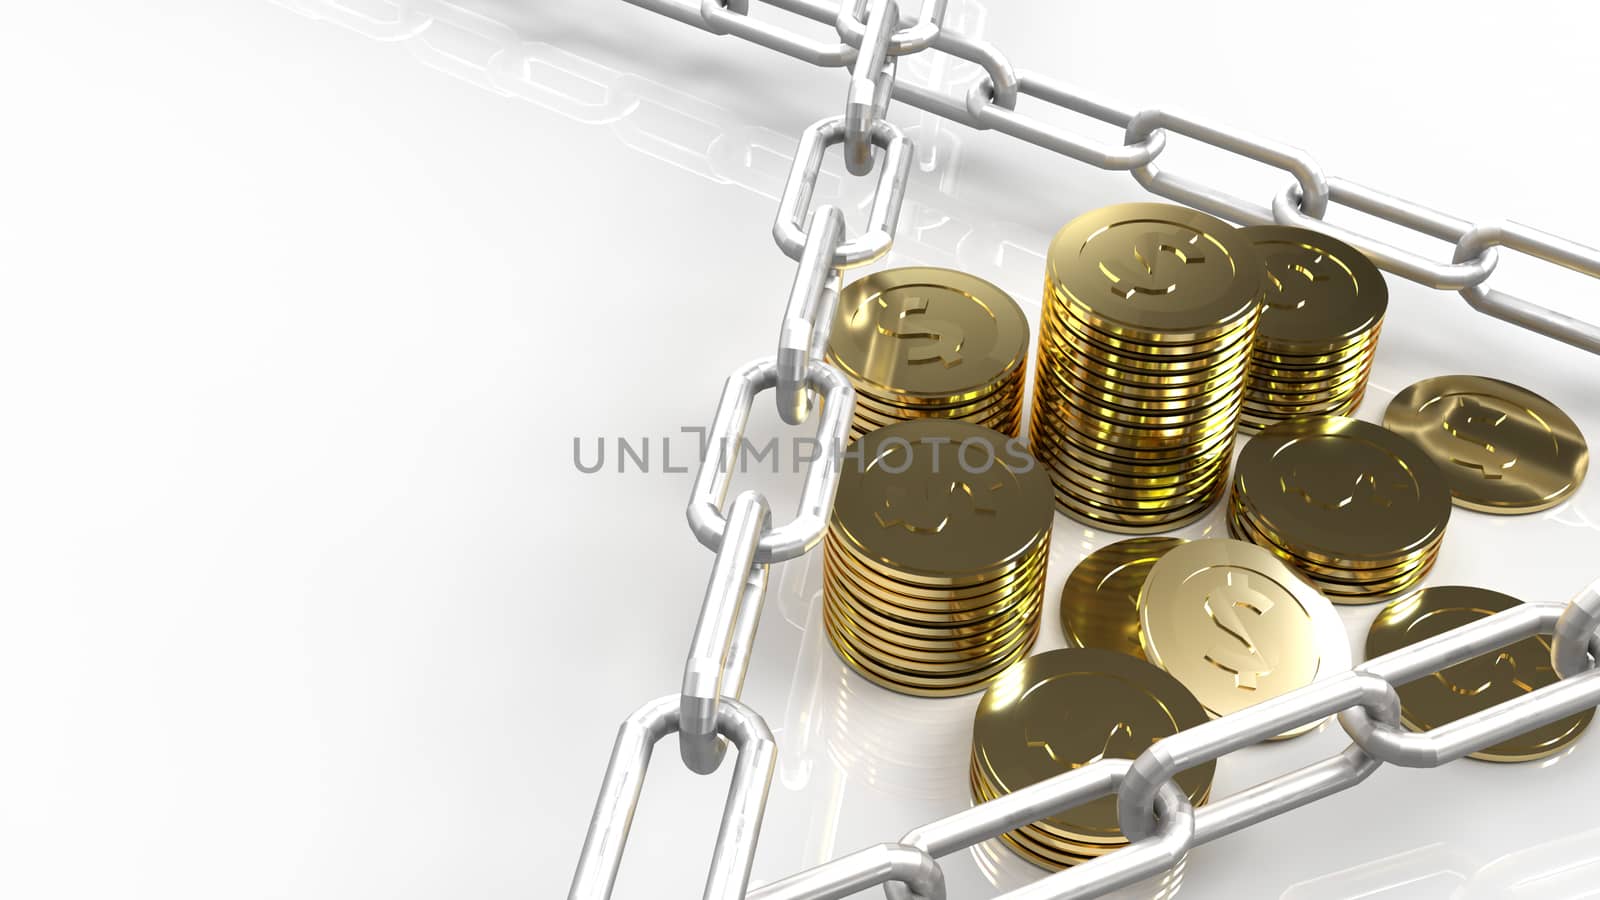 The gold coins and chain for business content 3d rendering.